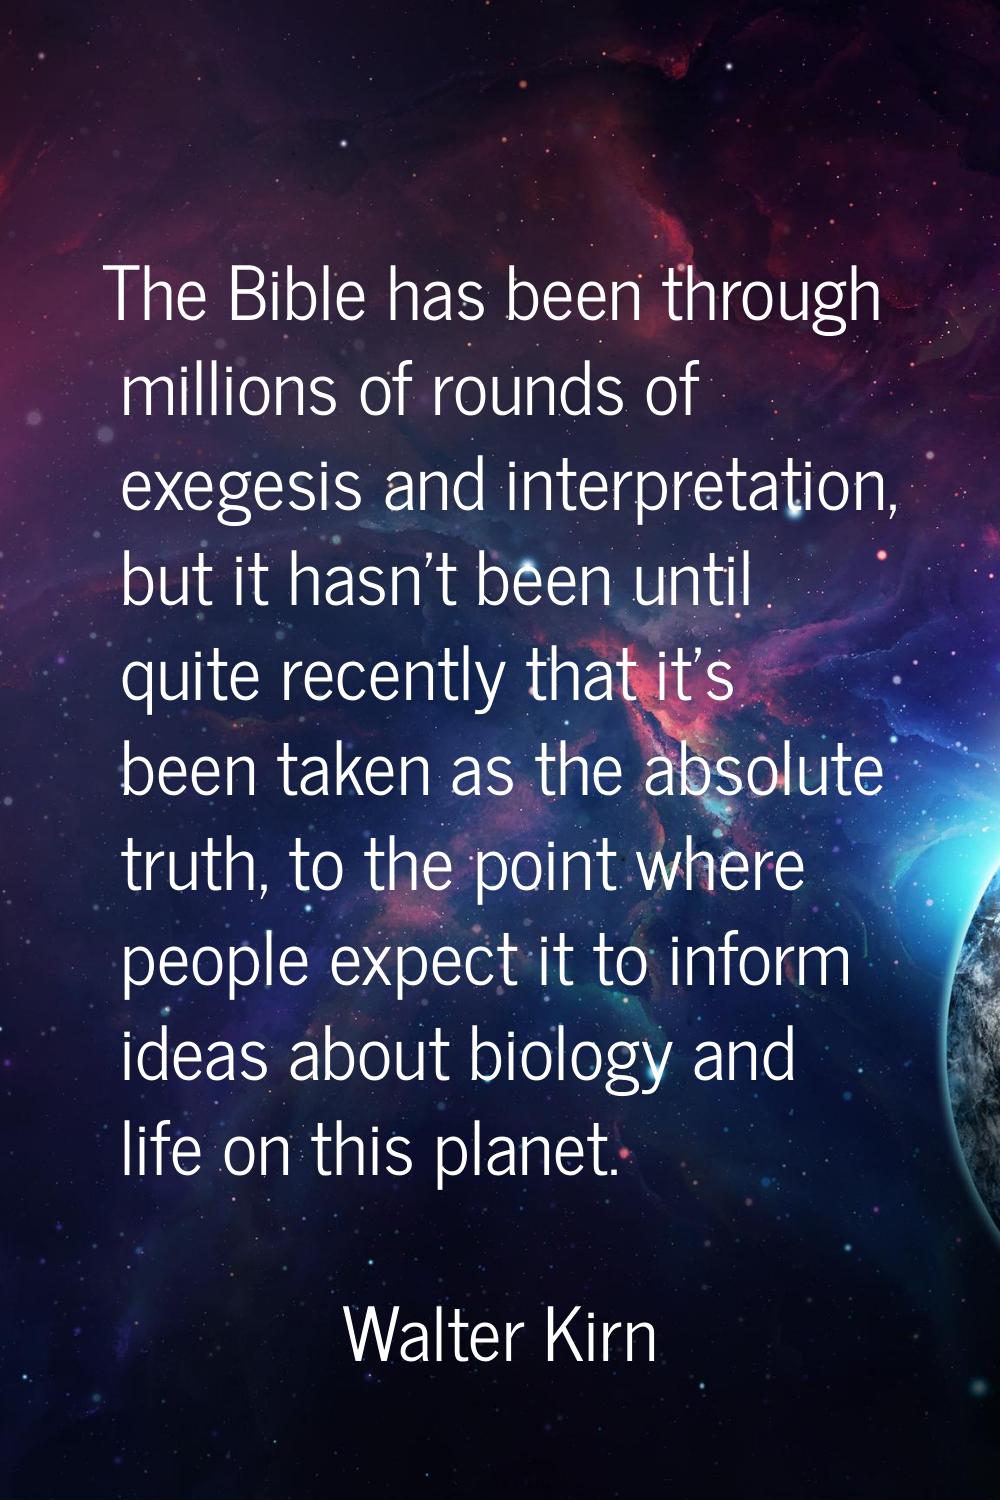 The Bible has been through millions of rounds of exegesis and interpretation, but it hasn't been un